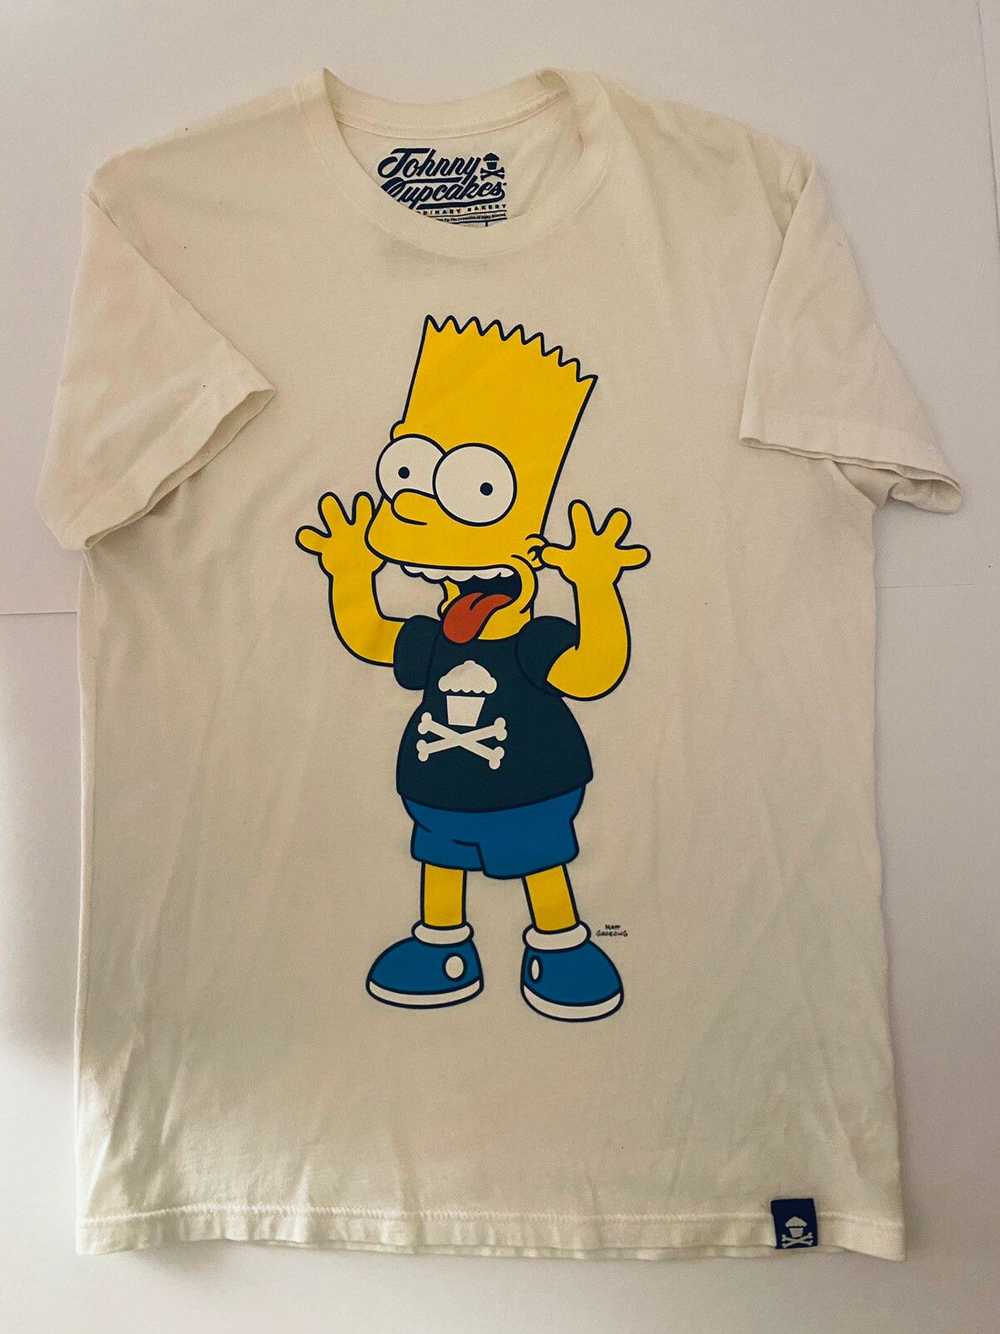 Johnny Cupcakes Johnny Cupcakes x The Simpsons - image 1